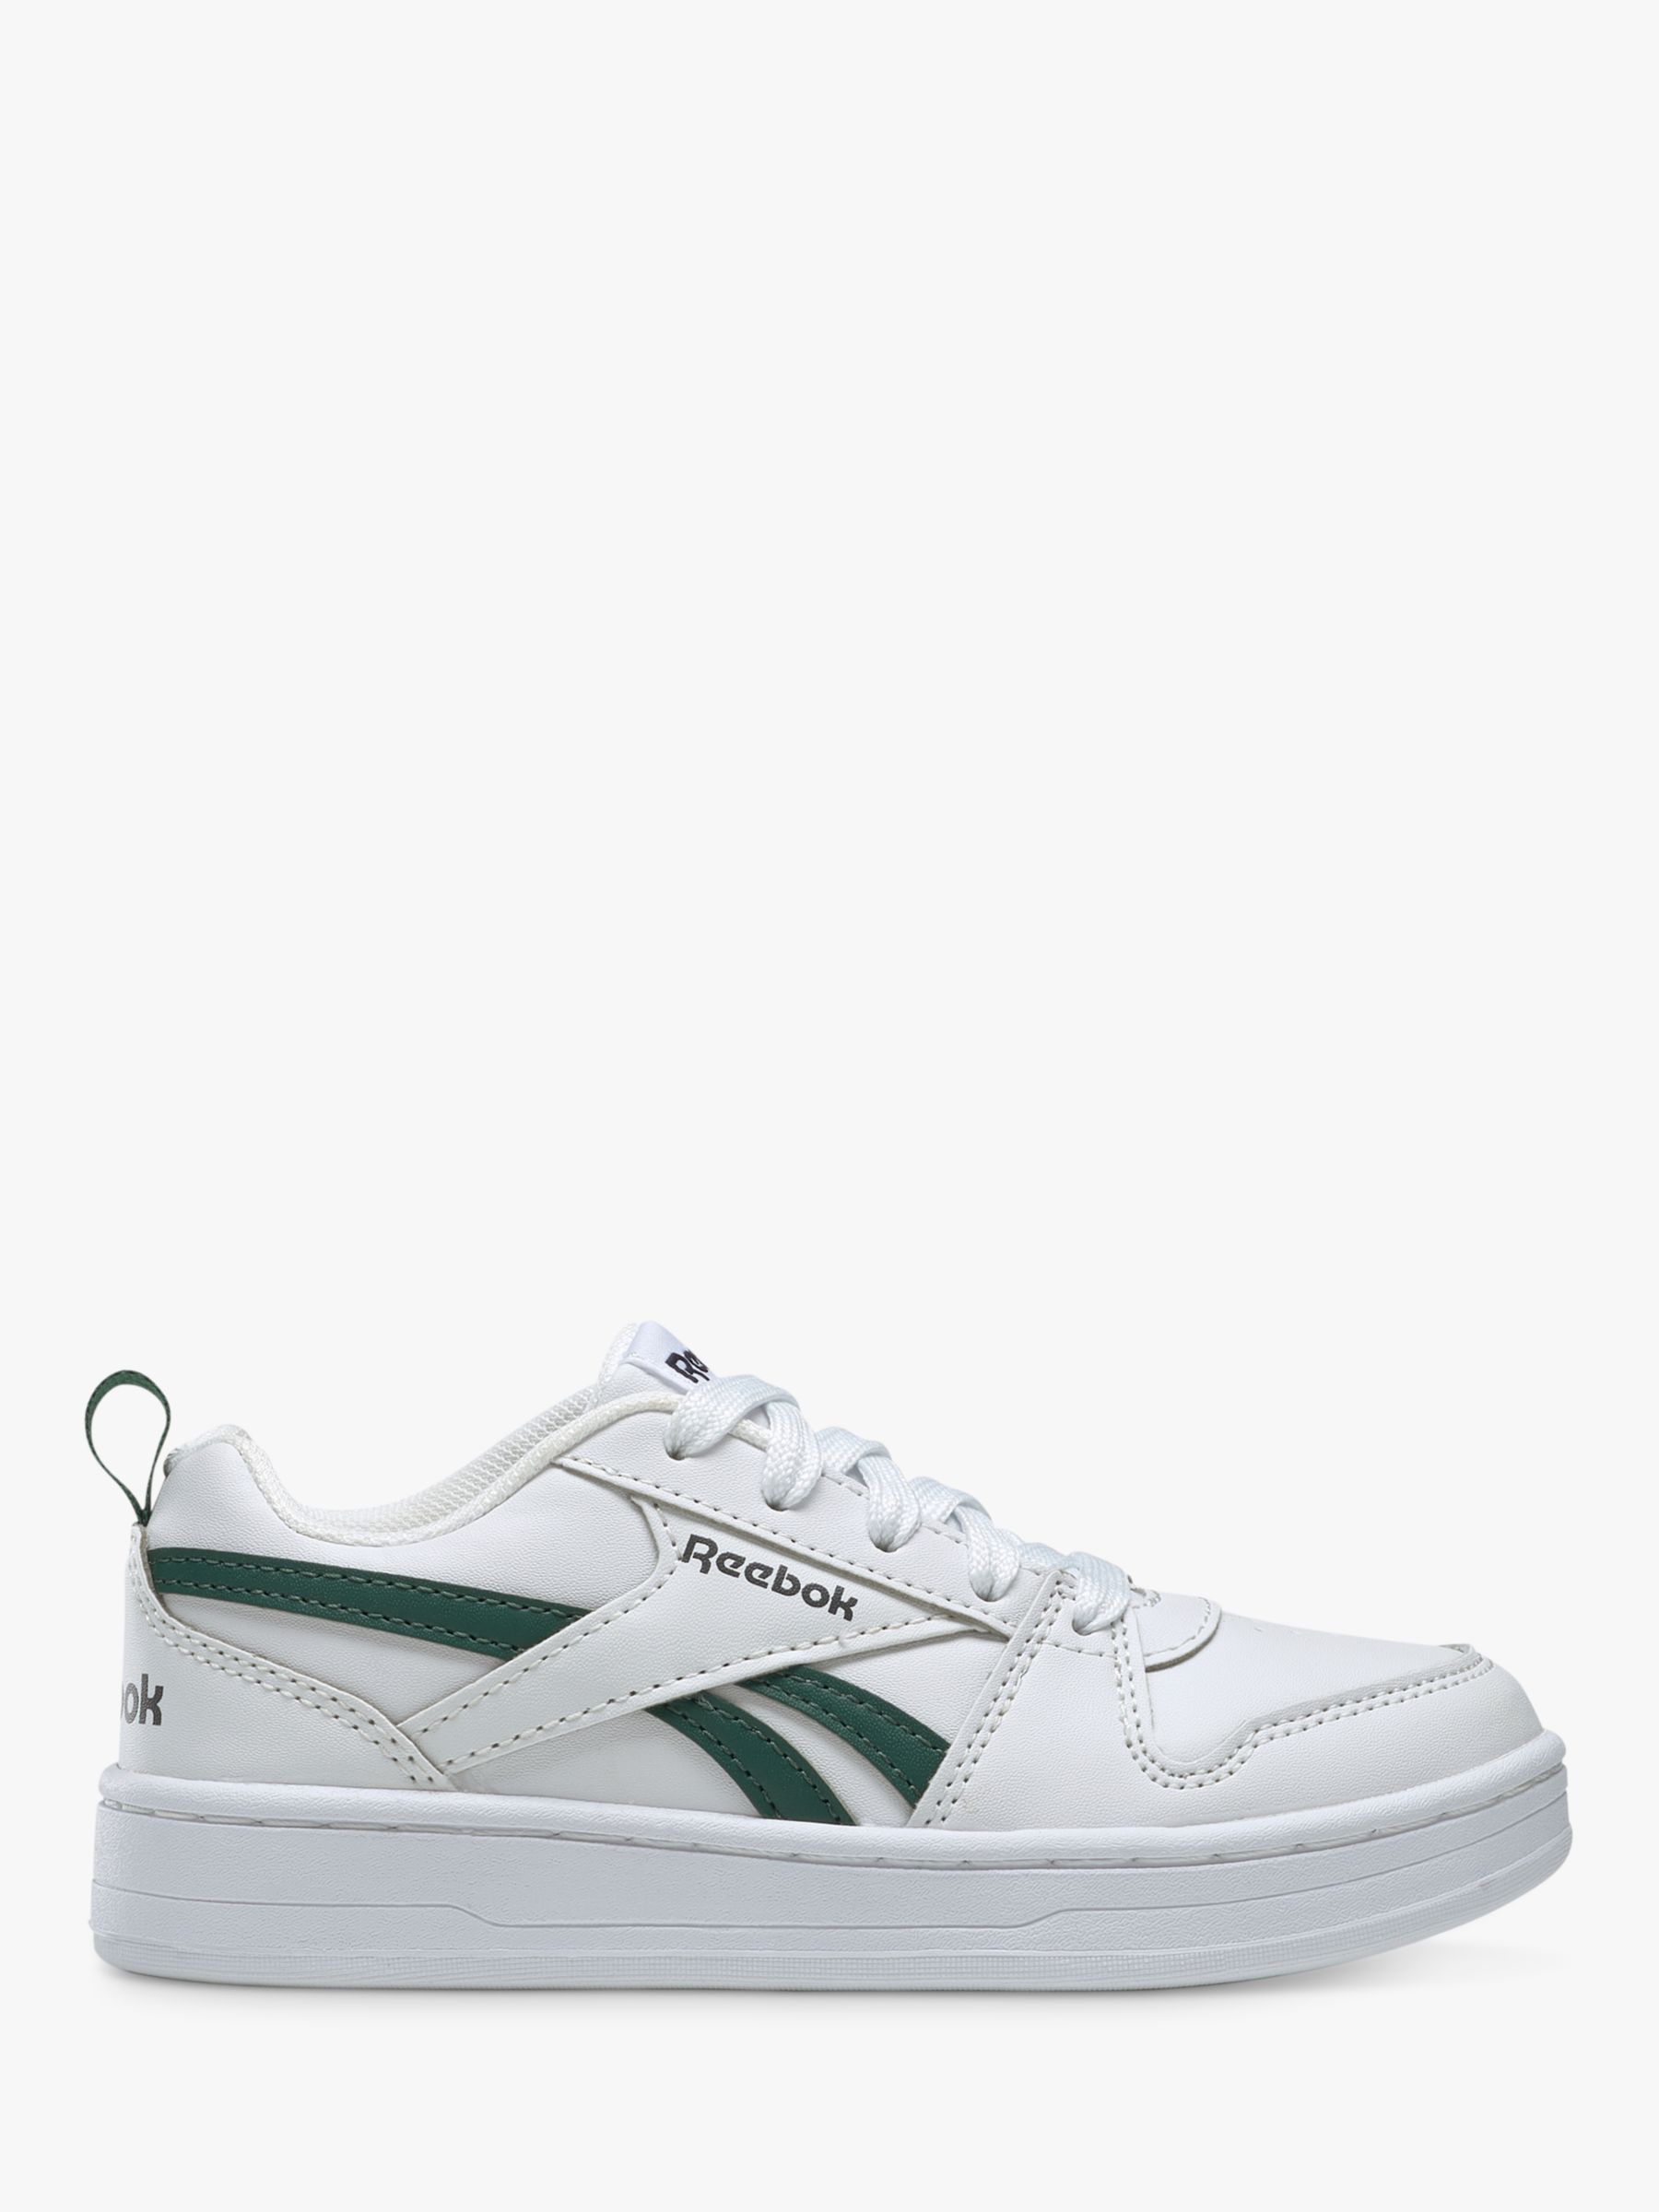 Reebok Kids' Royal Prime 2.0 Lace Up Trainers, Cloud White/Dark Green/Cloud White at Lewis & Partners